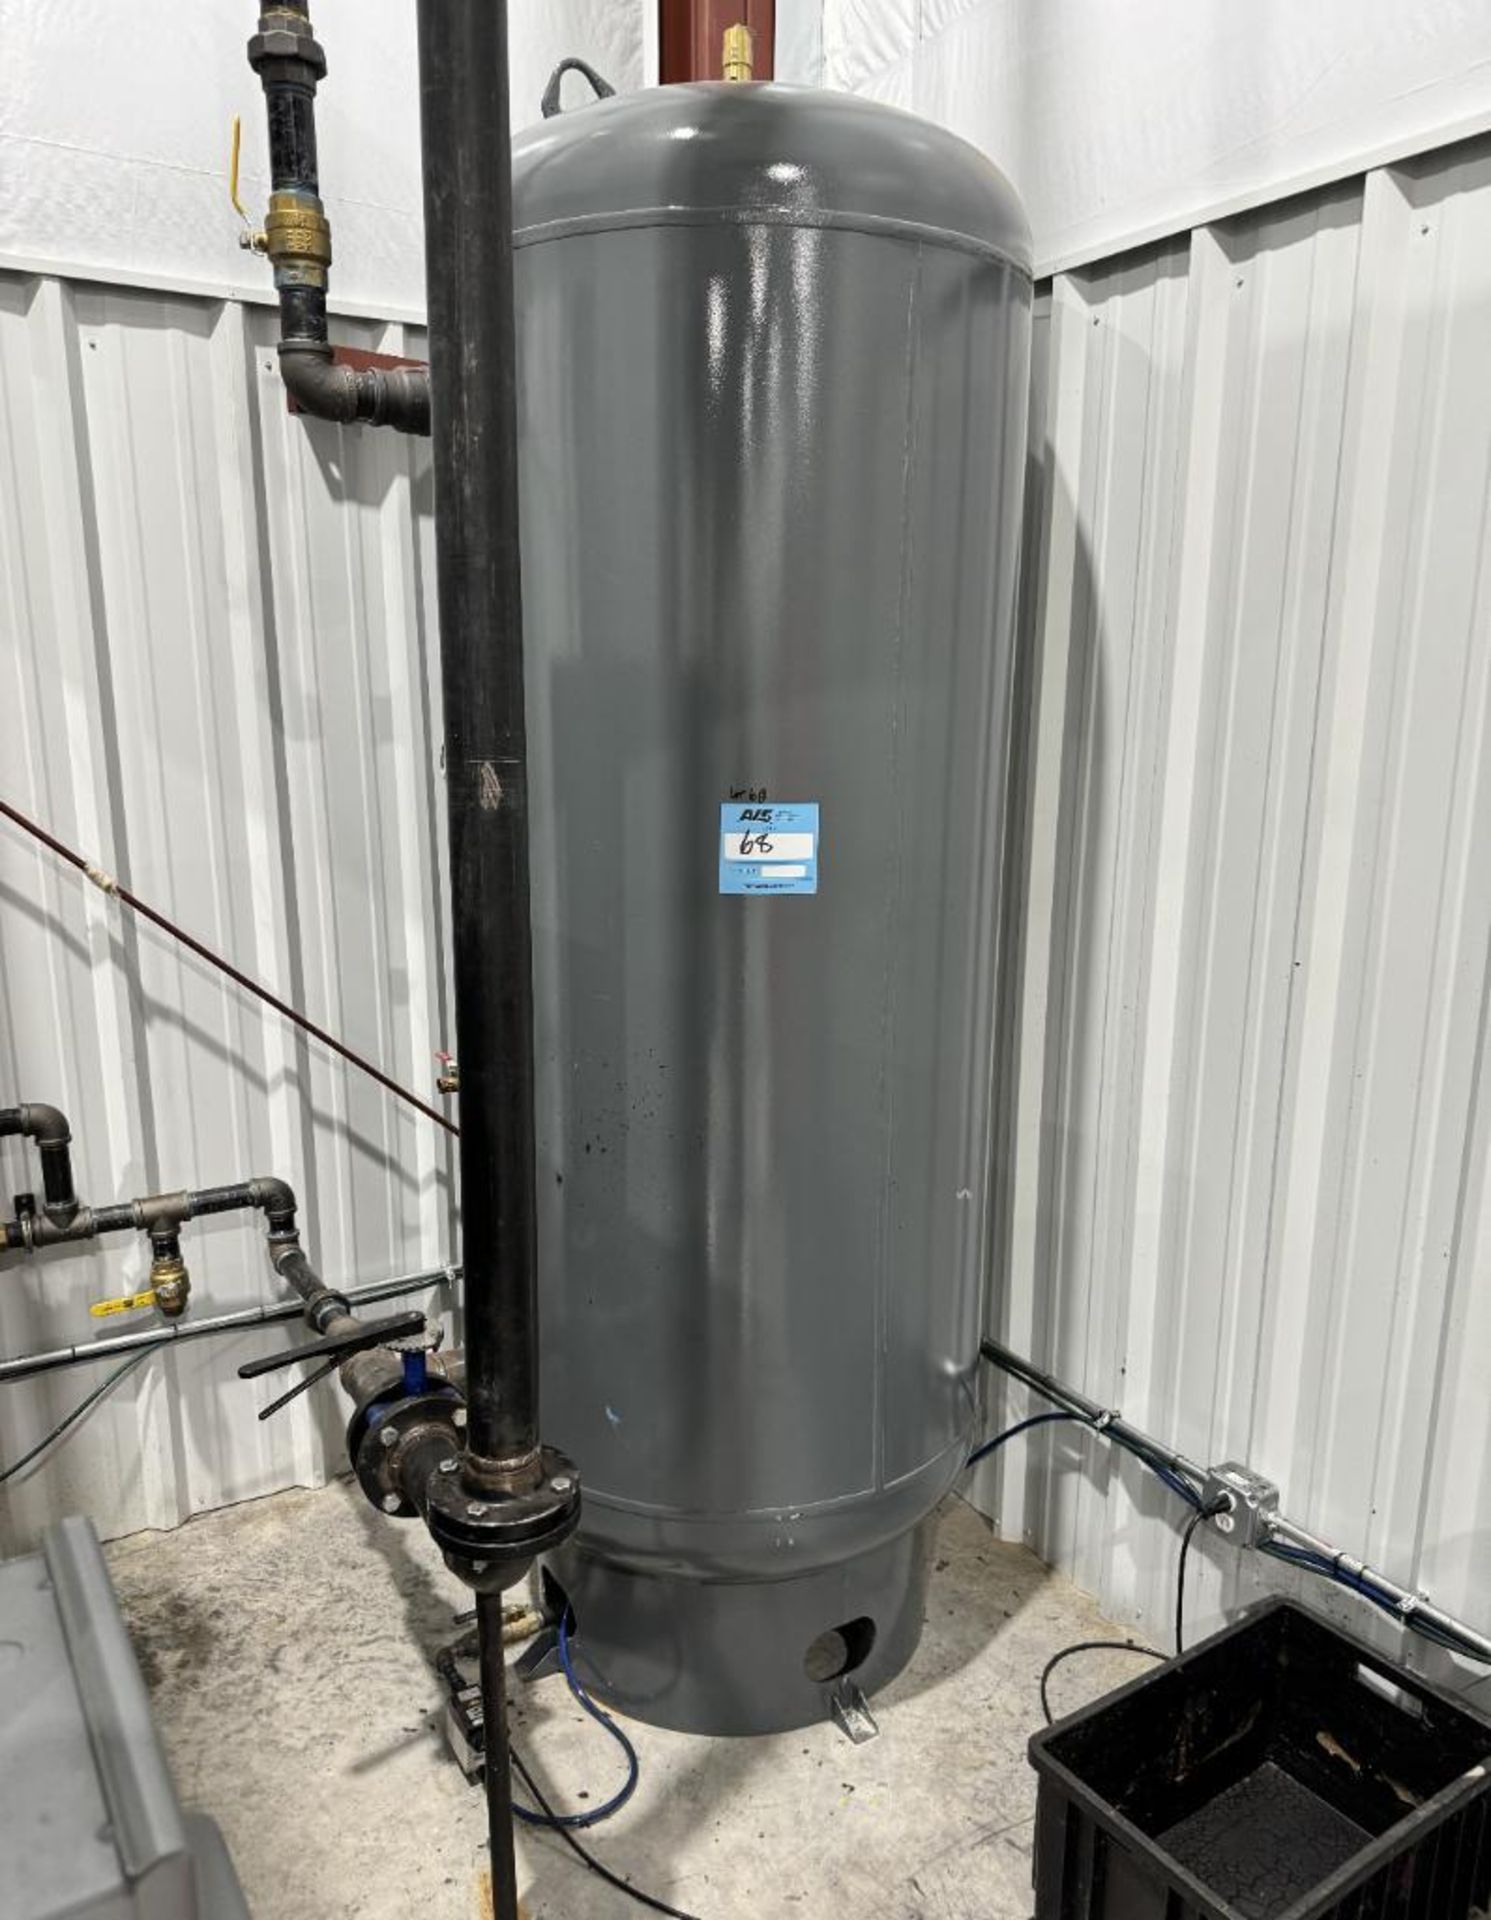 Samuel Pressure Vessel Approximate 350 Gallon Air Receiving Tank. Rated 165 psi at 400 degrees F. Na - Image 2 of 3